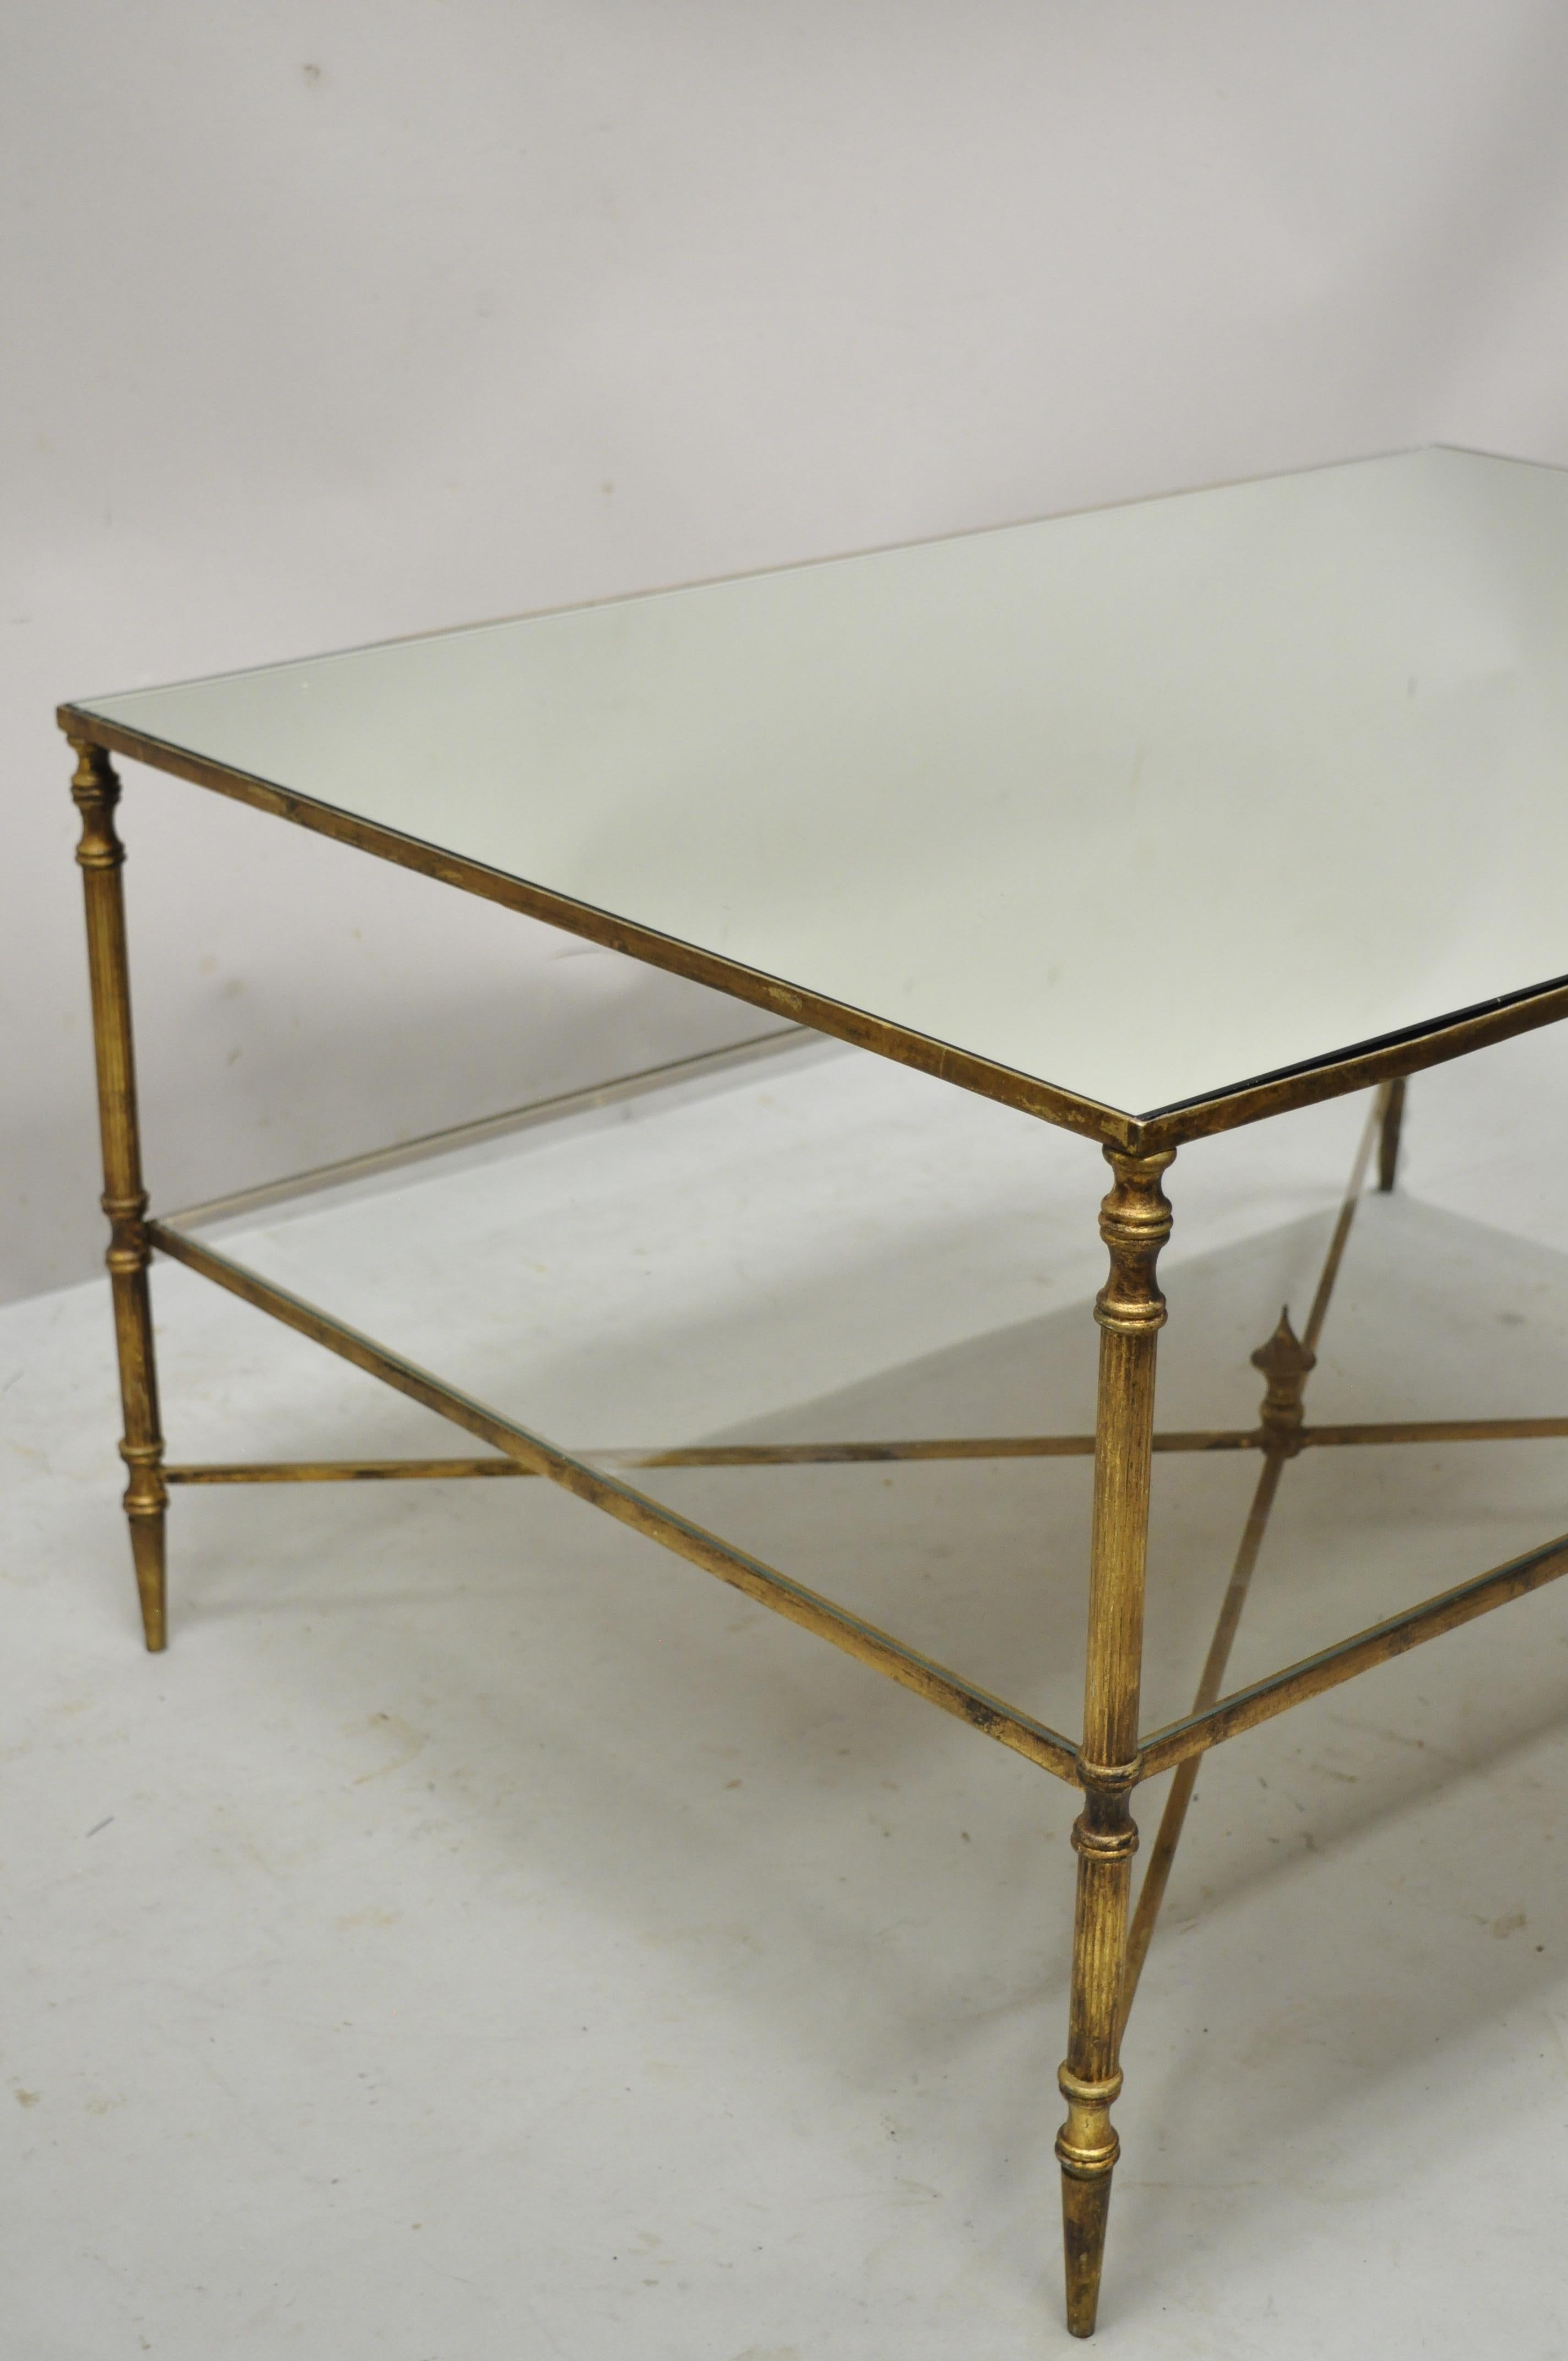 Vintage Italian Hollywood Regency Gold Iron Frame Coffee Table with Mirror Top 1